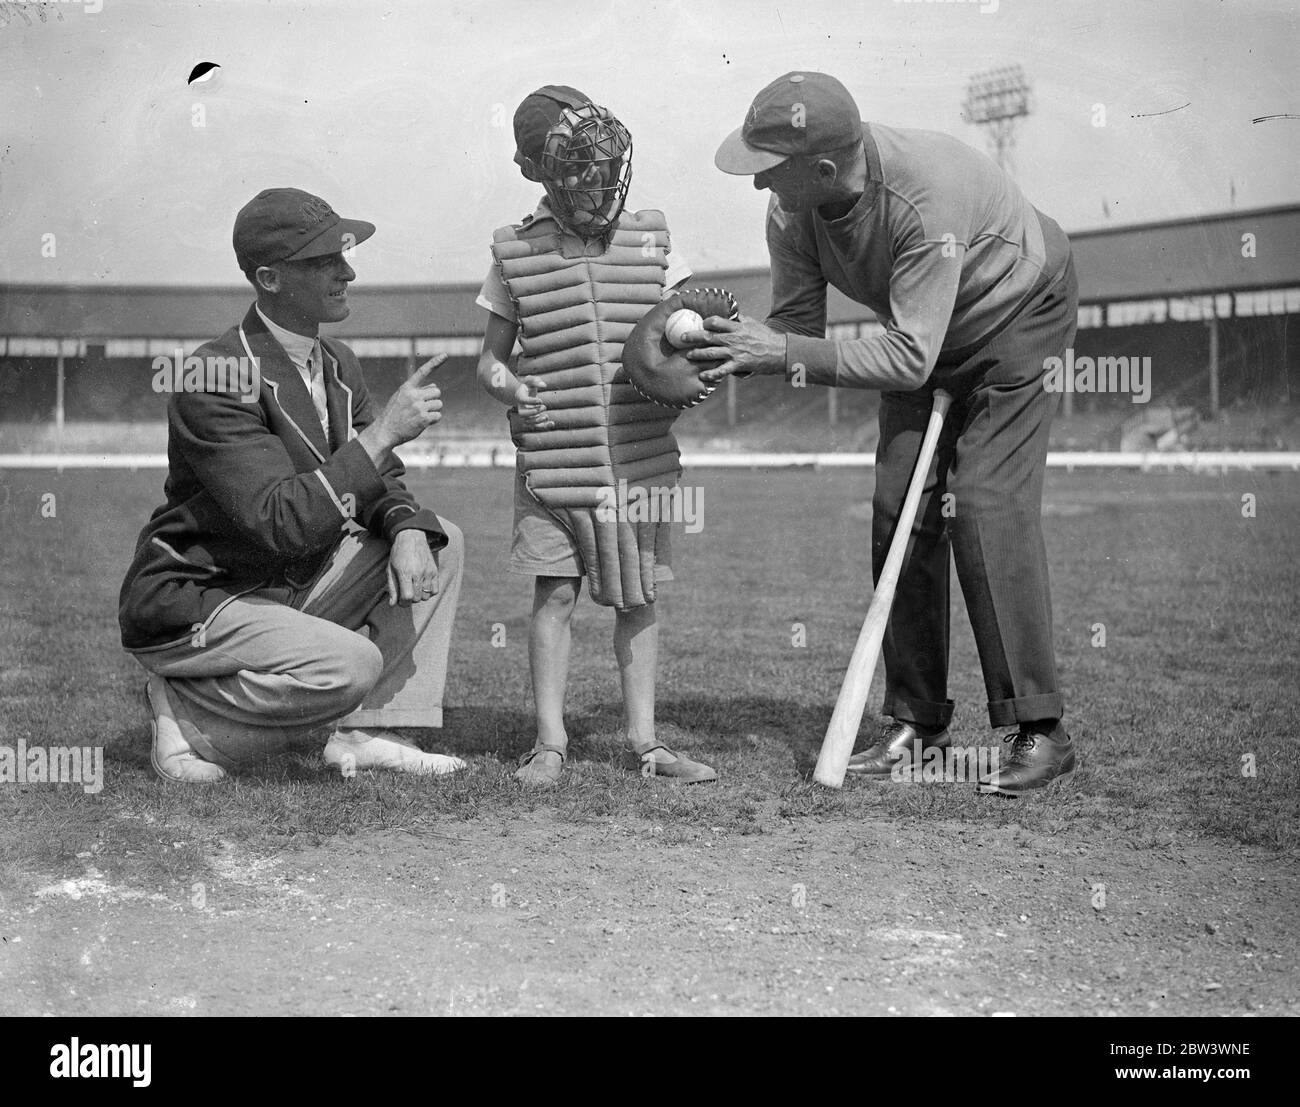 A Hundred London Boys Learn How To Play Baseball At The White City To discover young baseball talent , a hundred boys turned out for tuition at the White City Stadium under the guidance of  Doc  Hayden , the American manager - coach . Small - sized baseball gloves were provided , and the boys received instruction in fieldinf , pitching and batting . Boys who show the highest promise will play next year in a new juniour league . Photo shows :  Doc  Hayden ( right ) giving a small enthusiast some hints on catching . 17 Aug 1936 Stock Photo